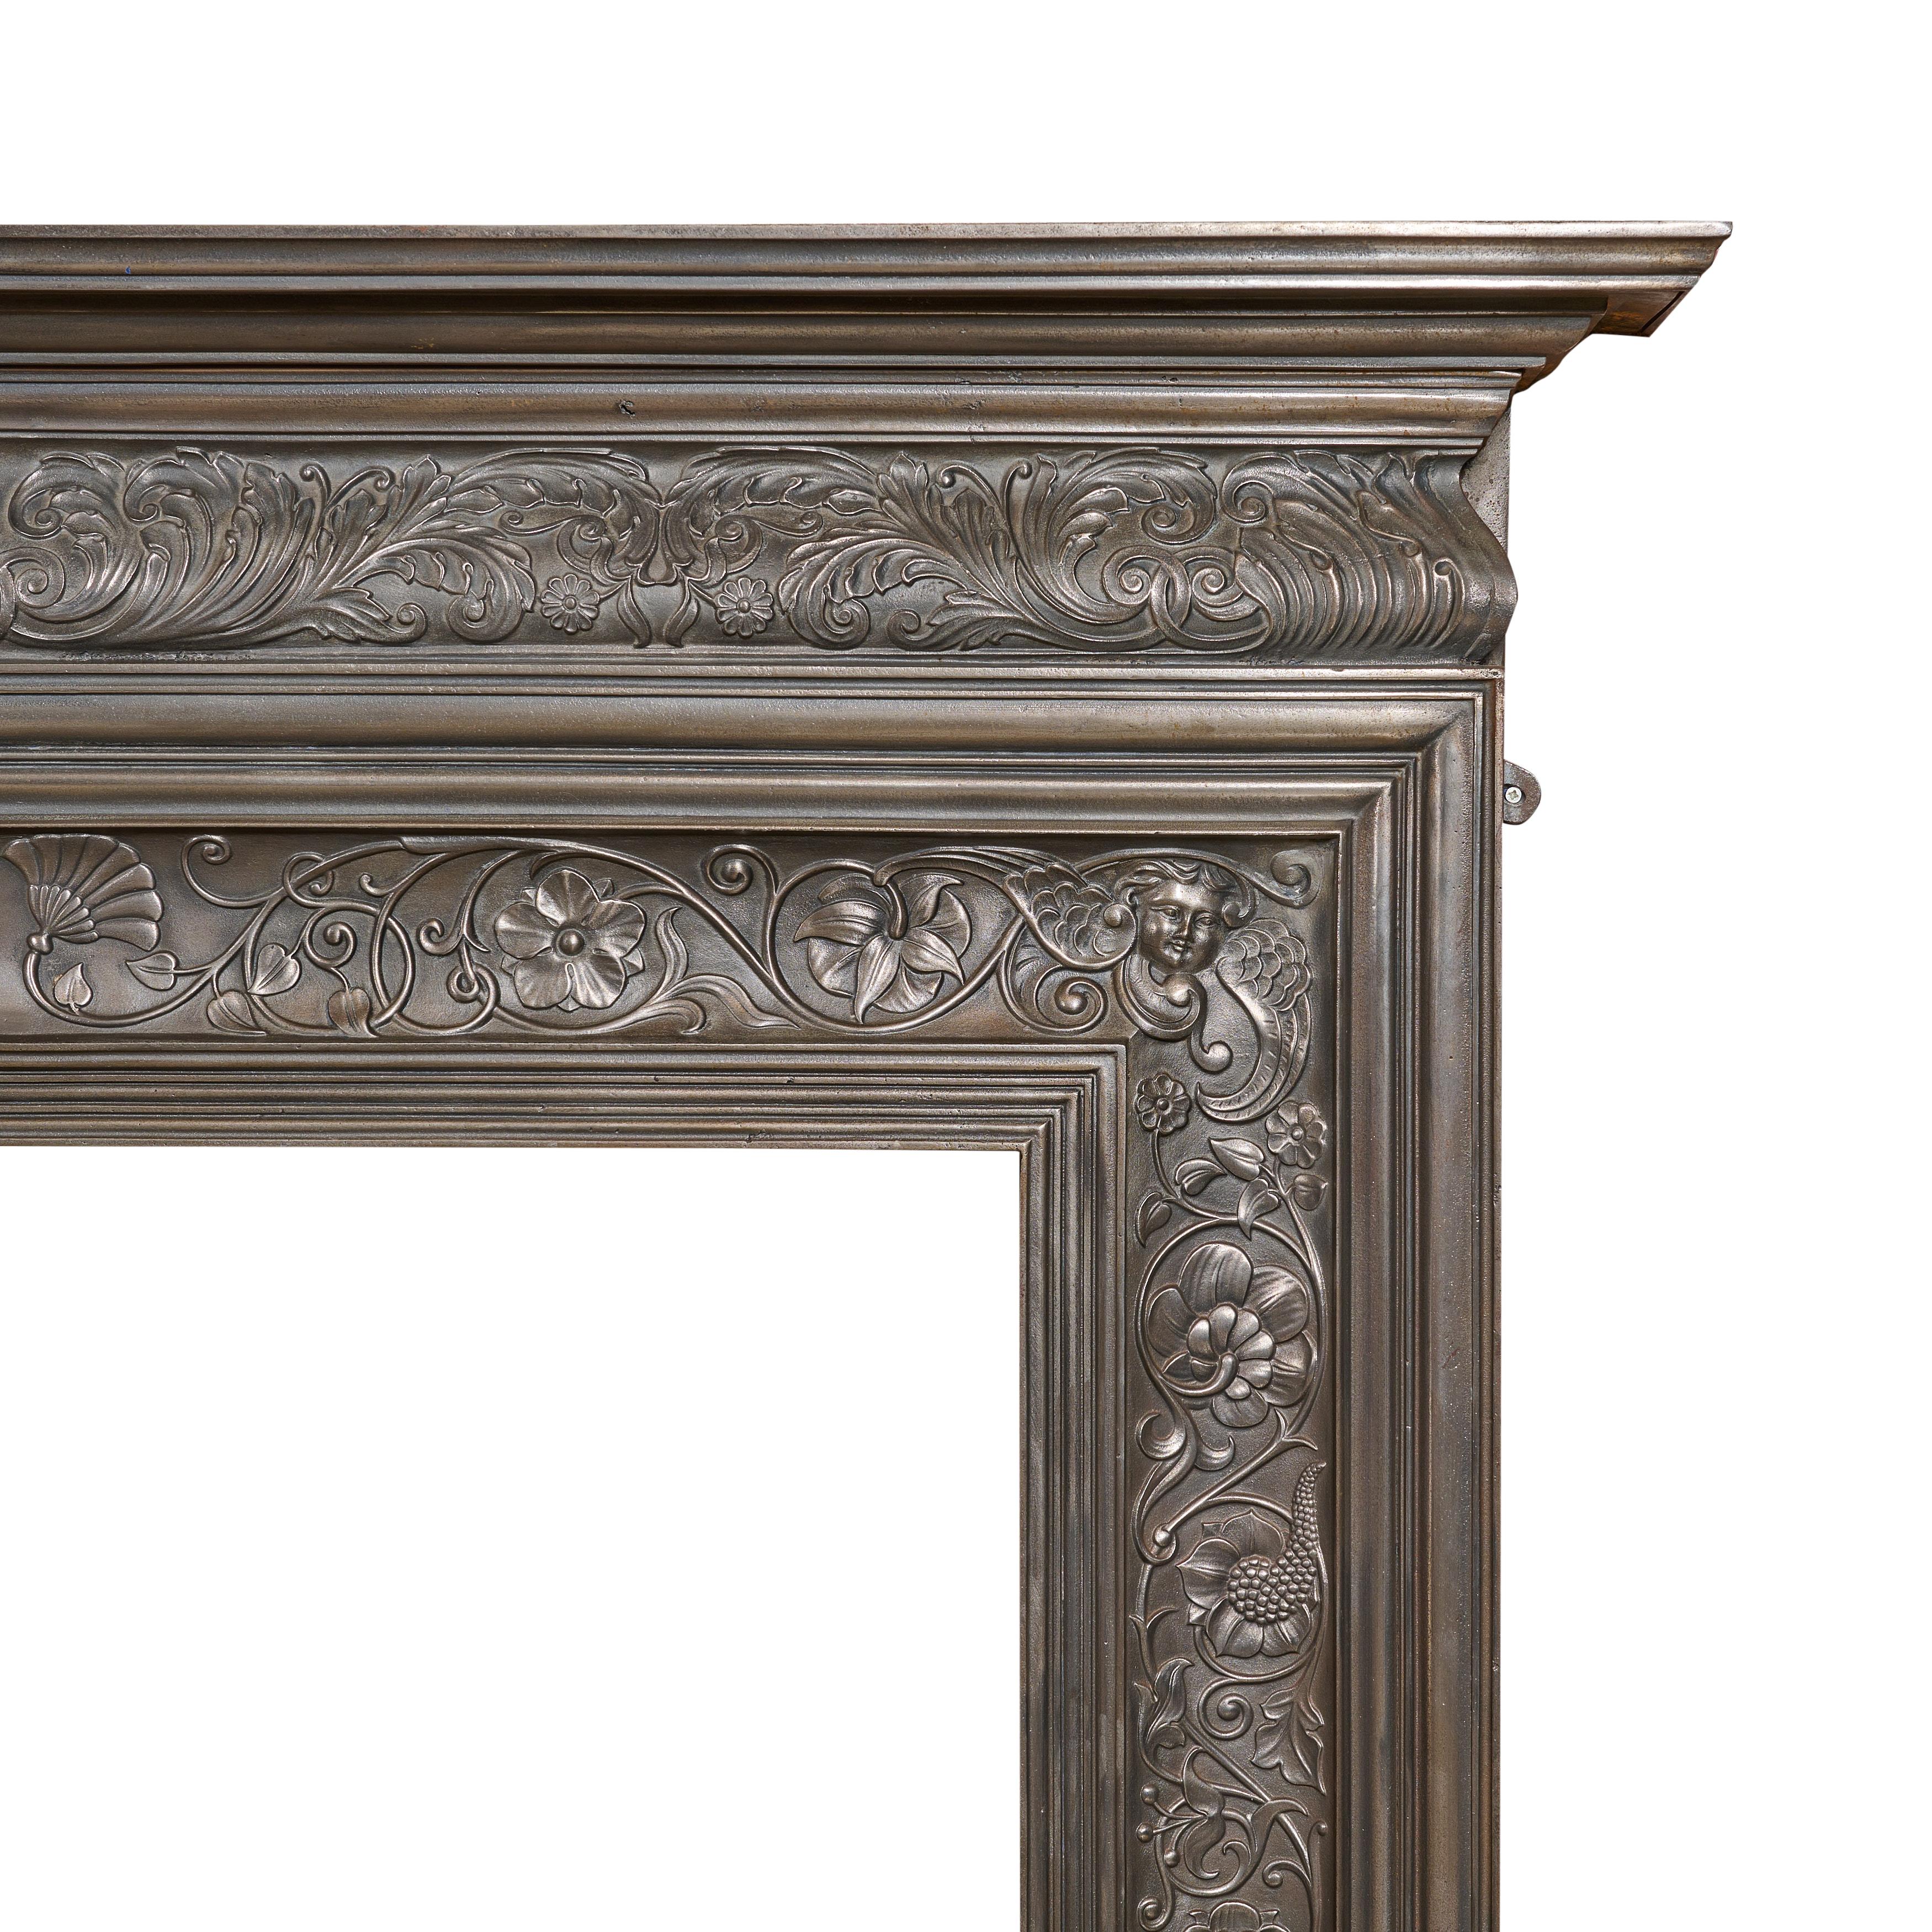 English Polished Cast Iron Fireplace Surround by Coalbrookdale In Good Condition For Sale In Chicago, IL